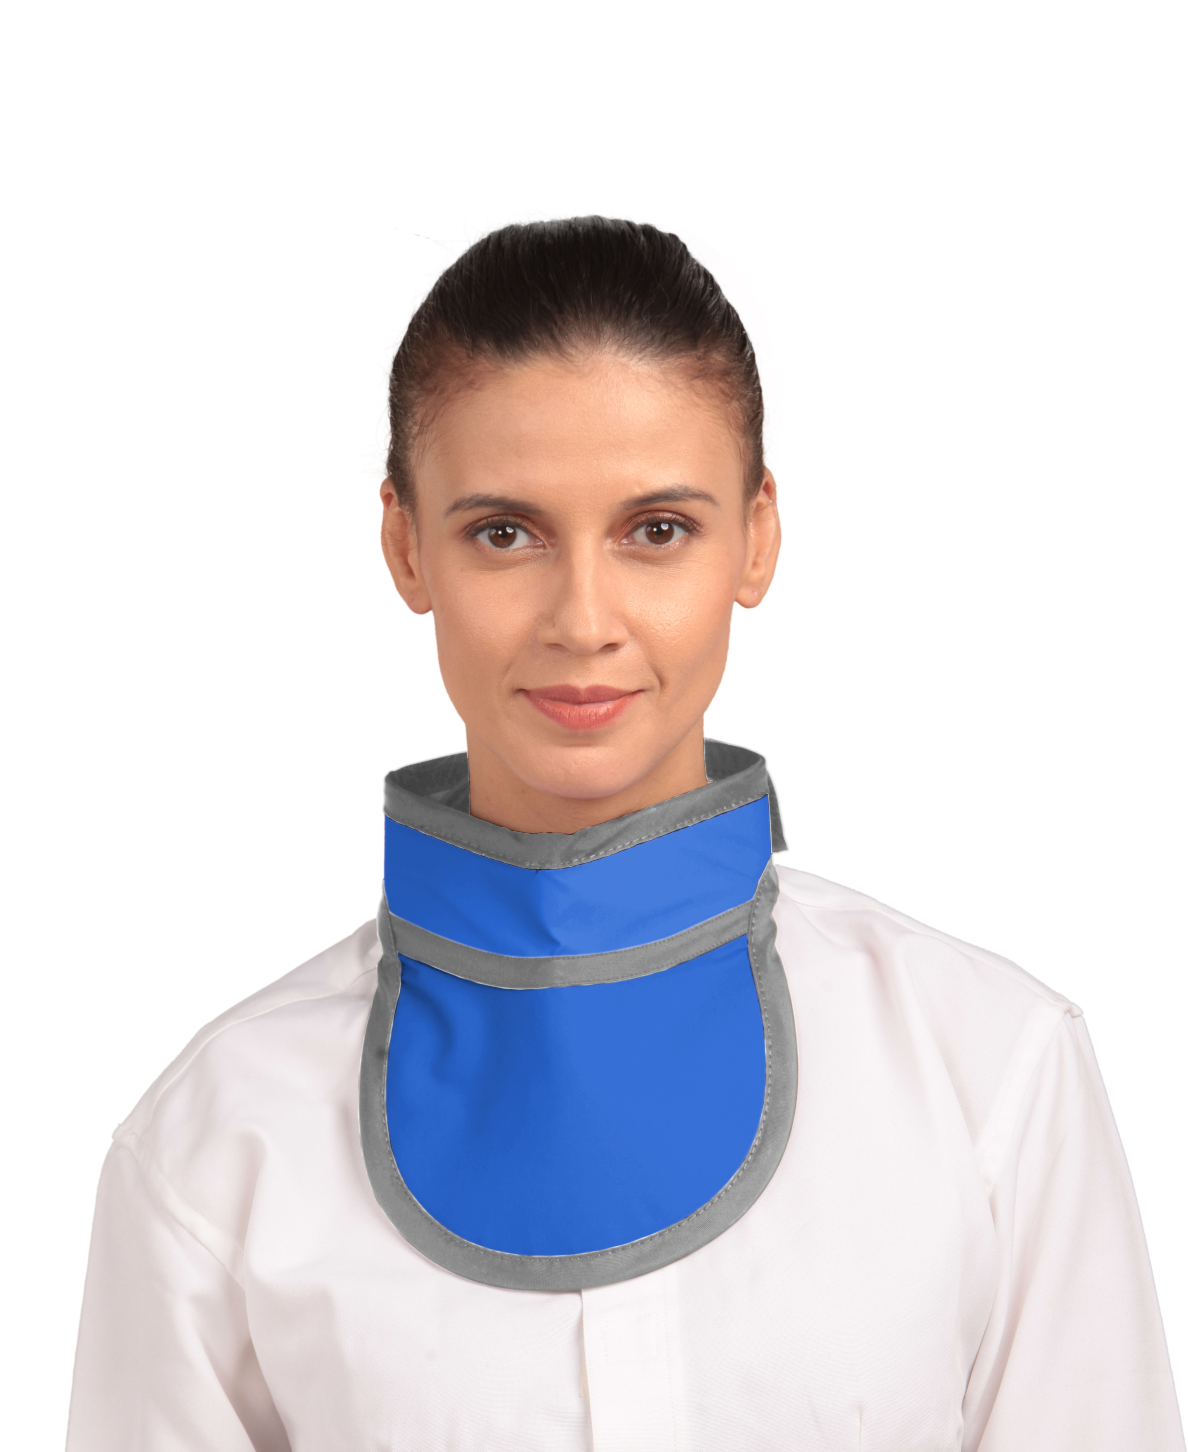 Frontal view of a female model wearing an electric blue colored thyroid collar “Slim” lined with grey color around the outer edges.